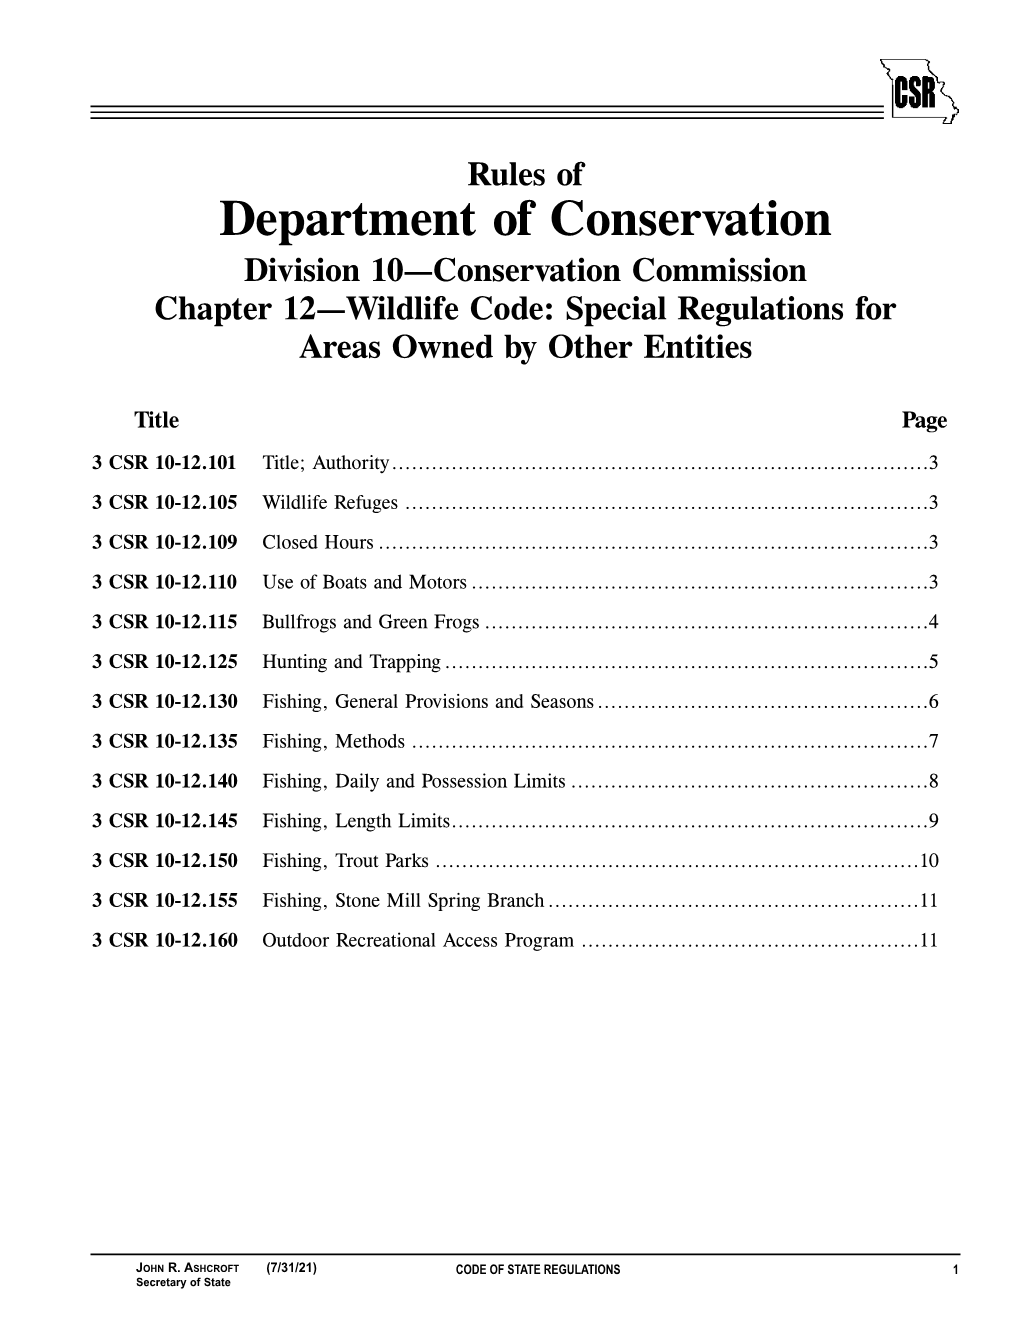 Department of Conservation Division 10—Conservation Commission Chapter 12—Wildlife Code: Special Regulations for Areas Owned by Other Entities